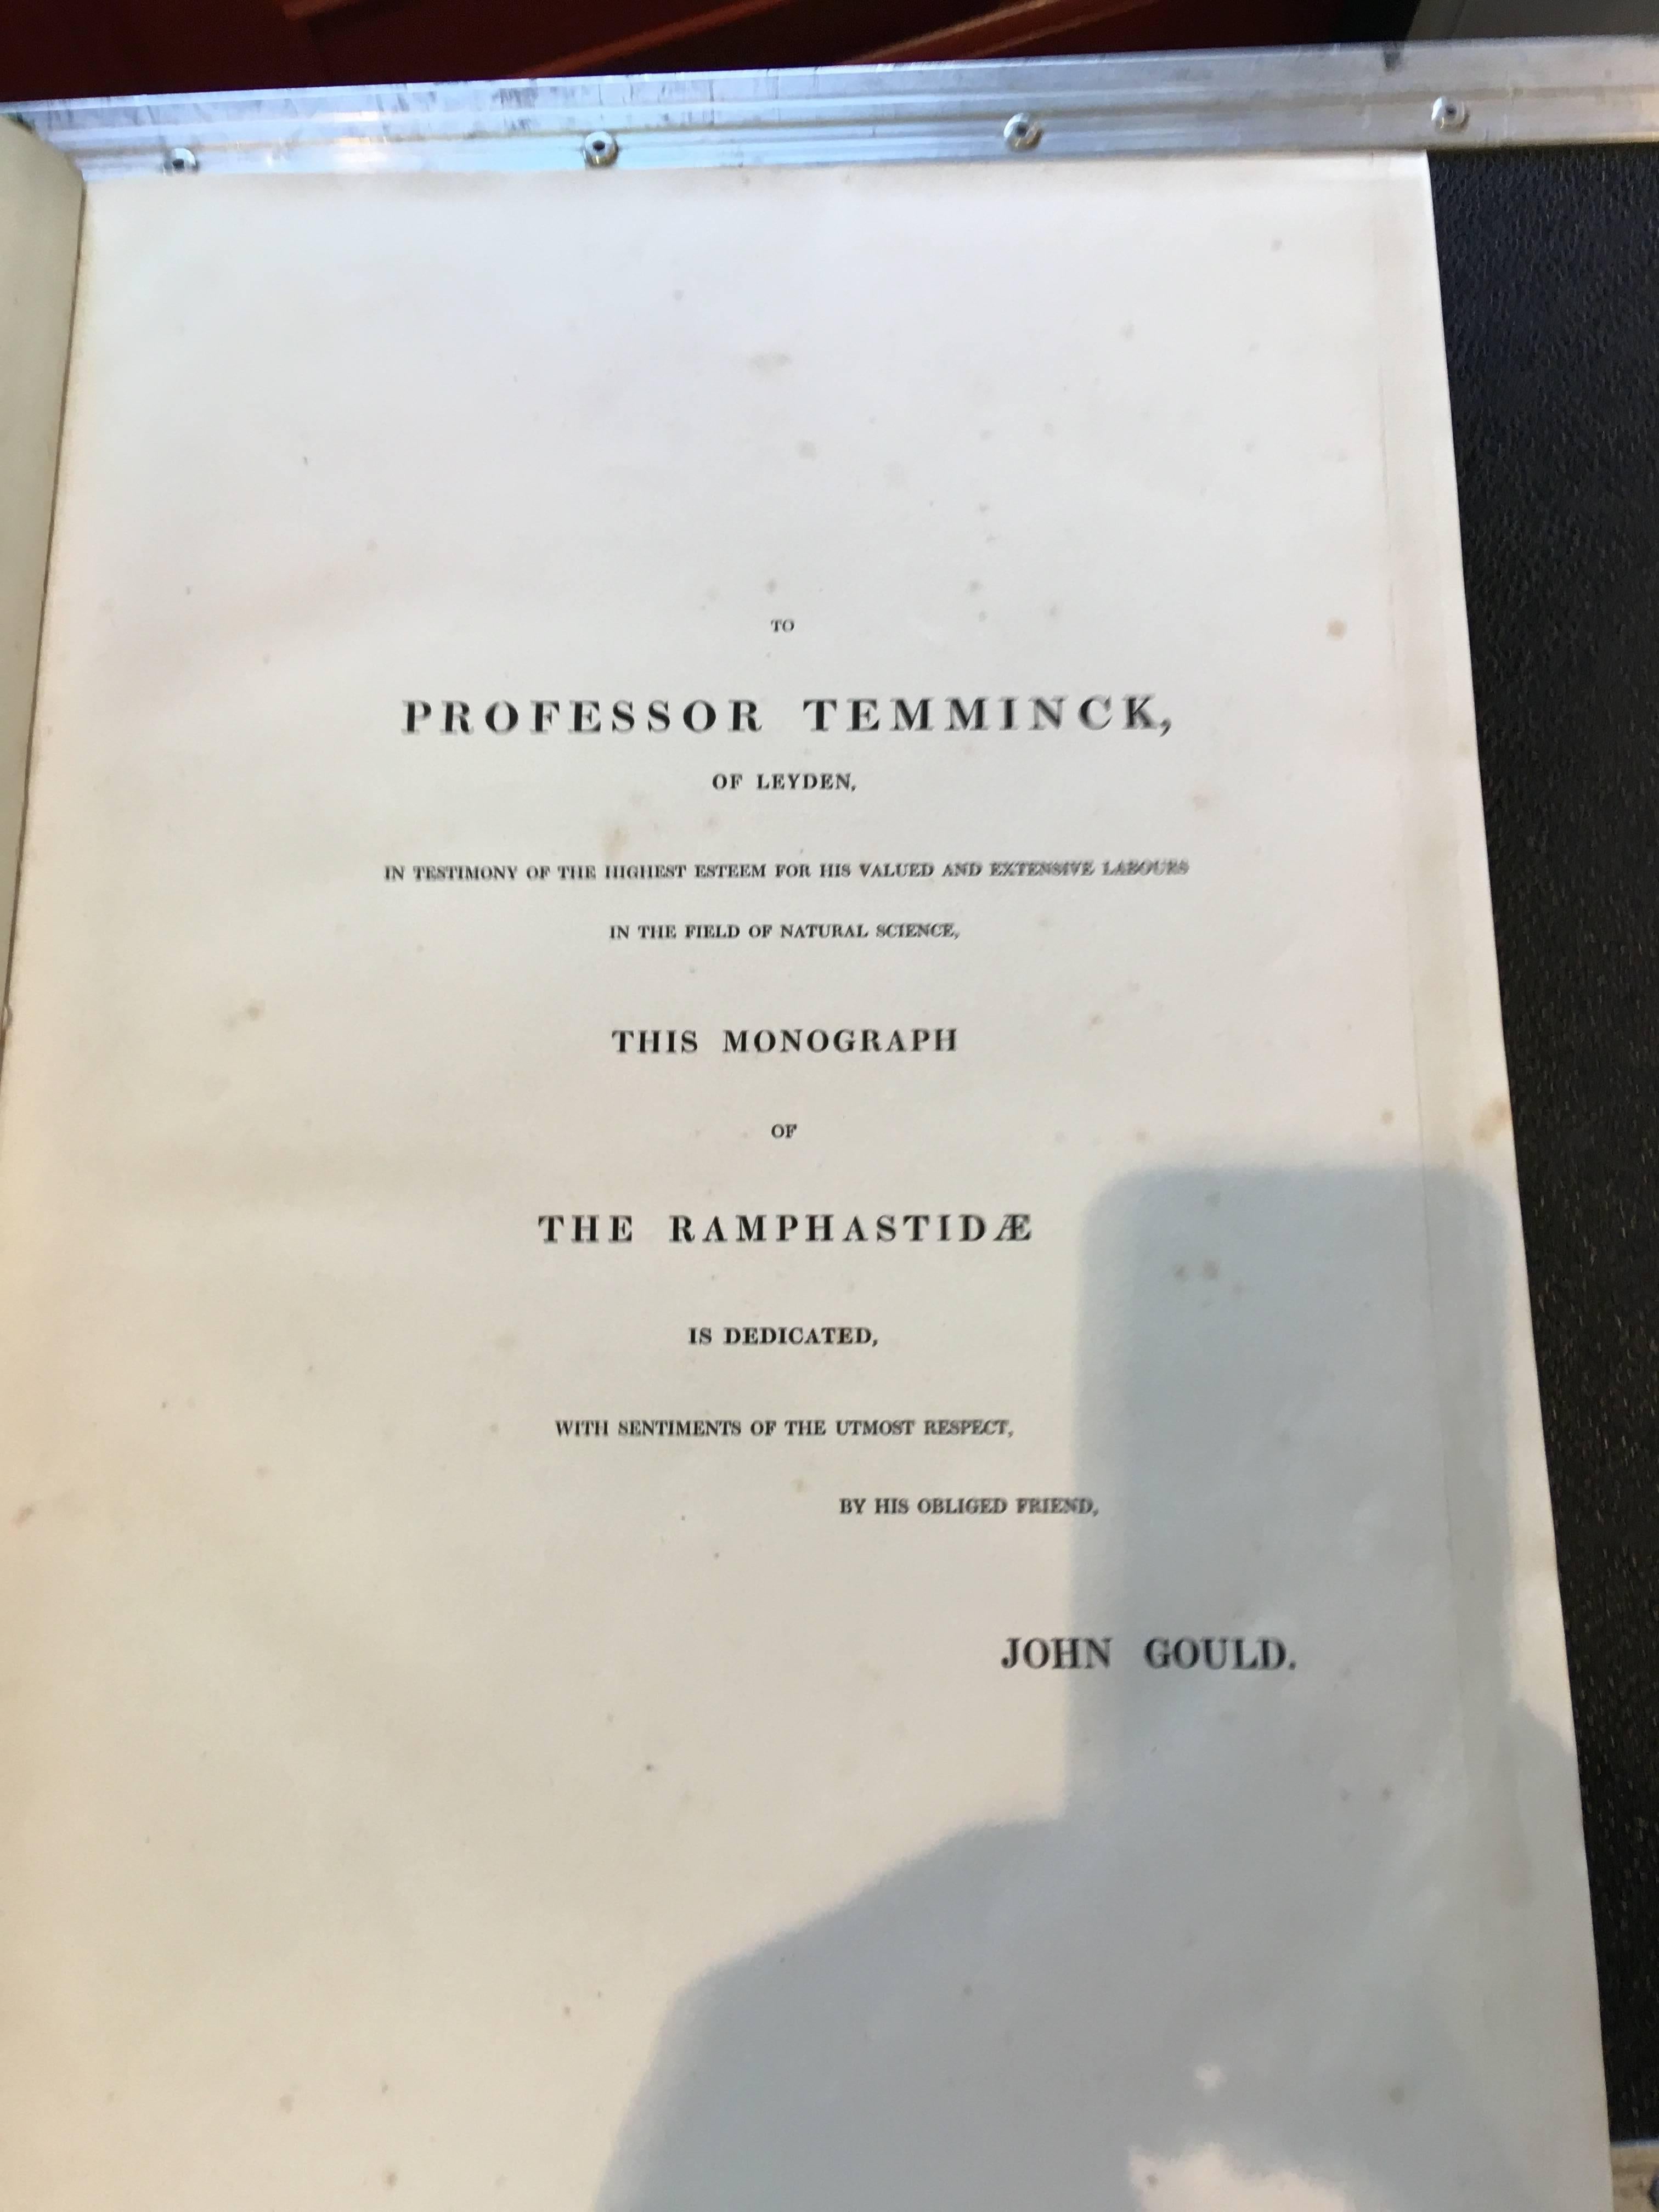 English Gould Monograph of the Ramphastide 1st edition book in Modern Display Case